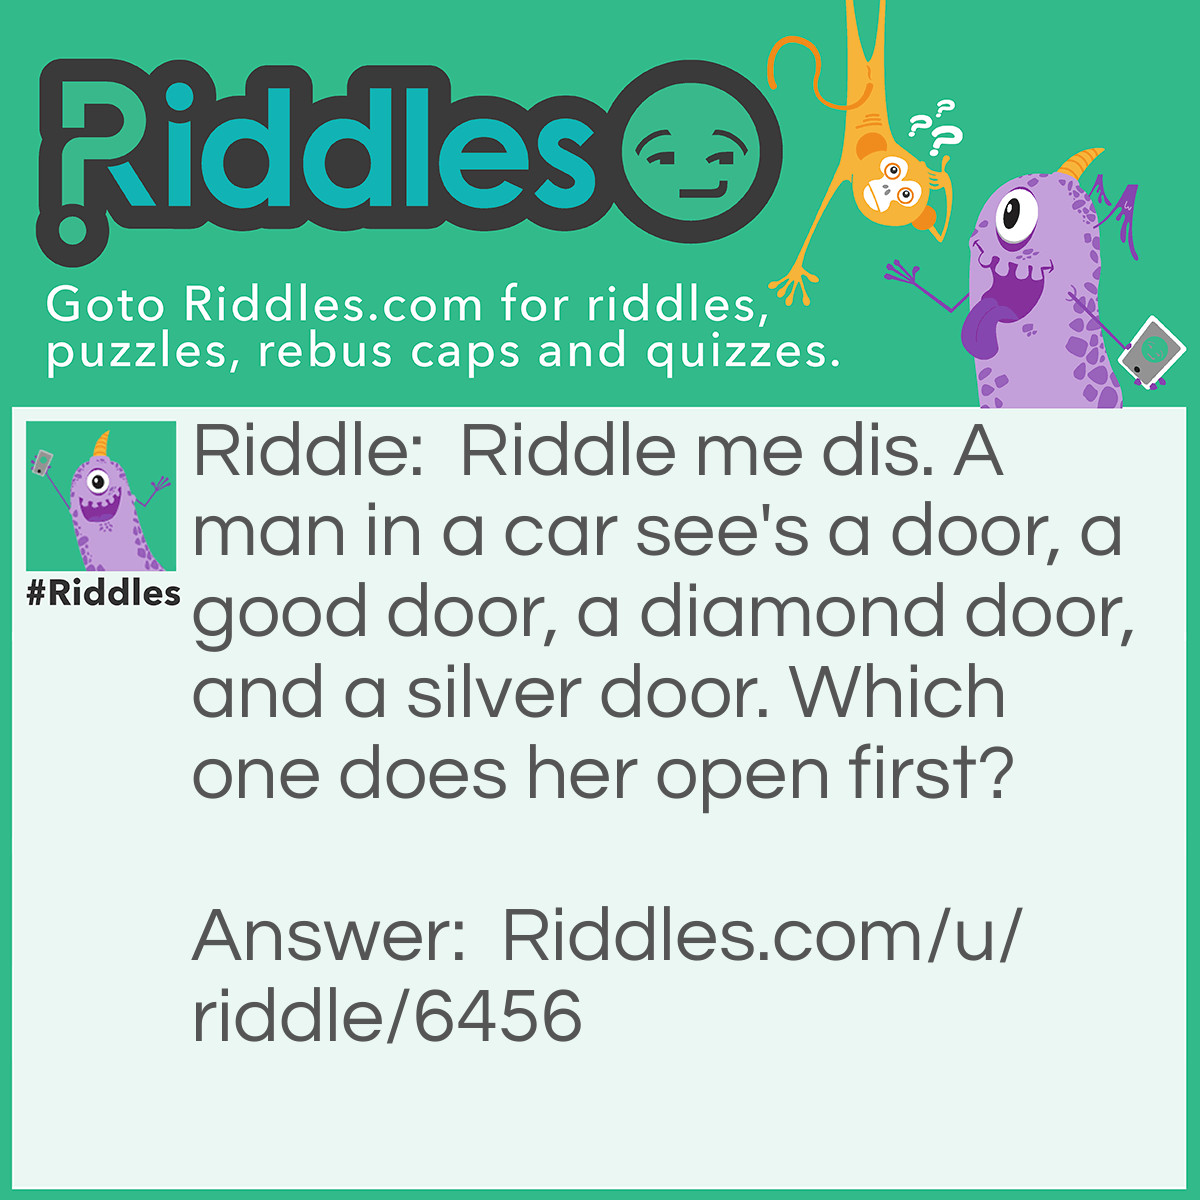 Riddle: Riddle me dis. A man in a car see's a door, a good door, a diamond door, and a silver door. Which one does her open first? Answer: The car door.